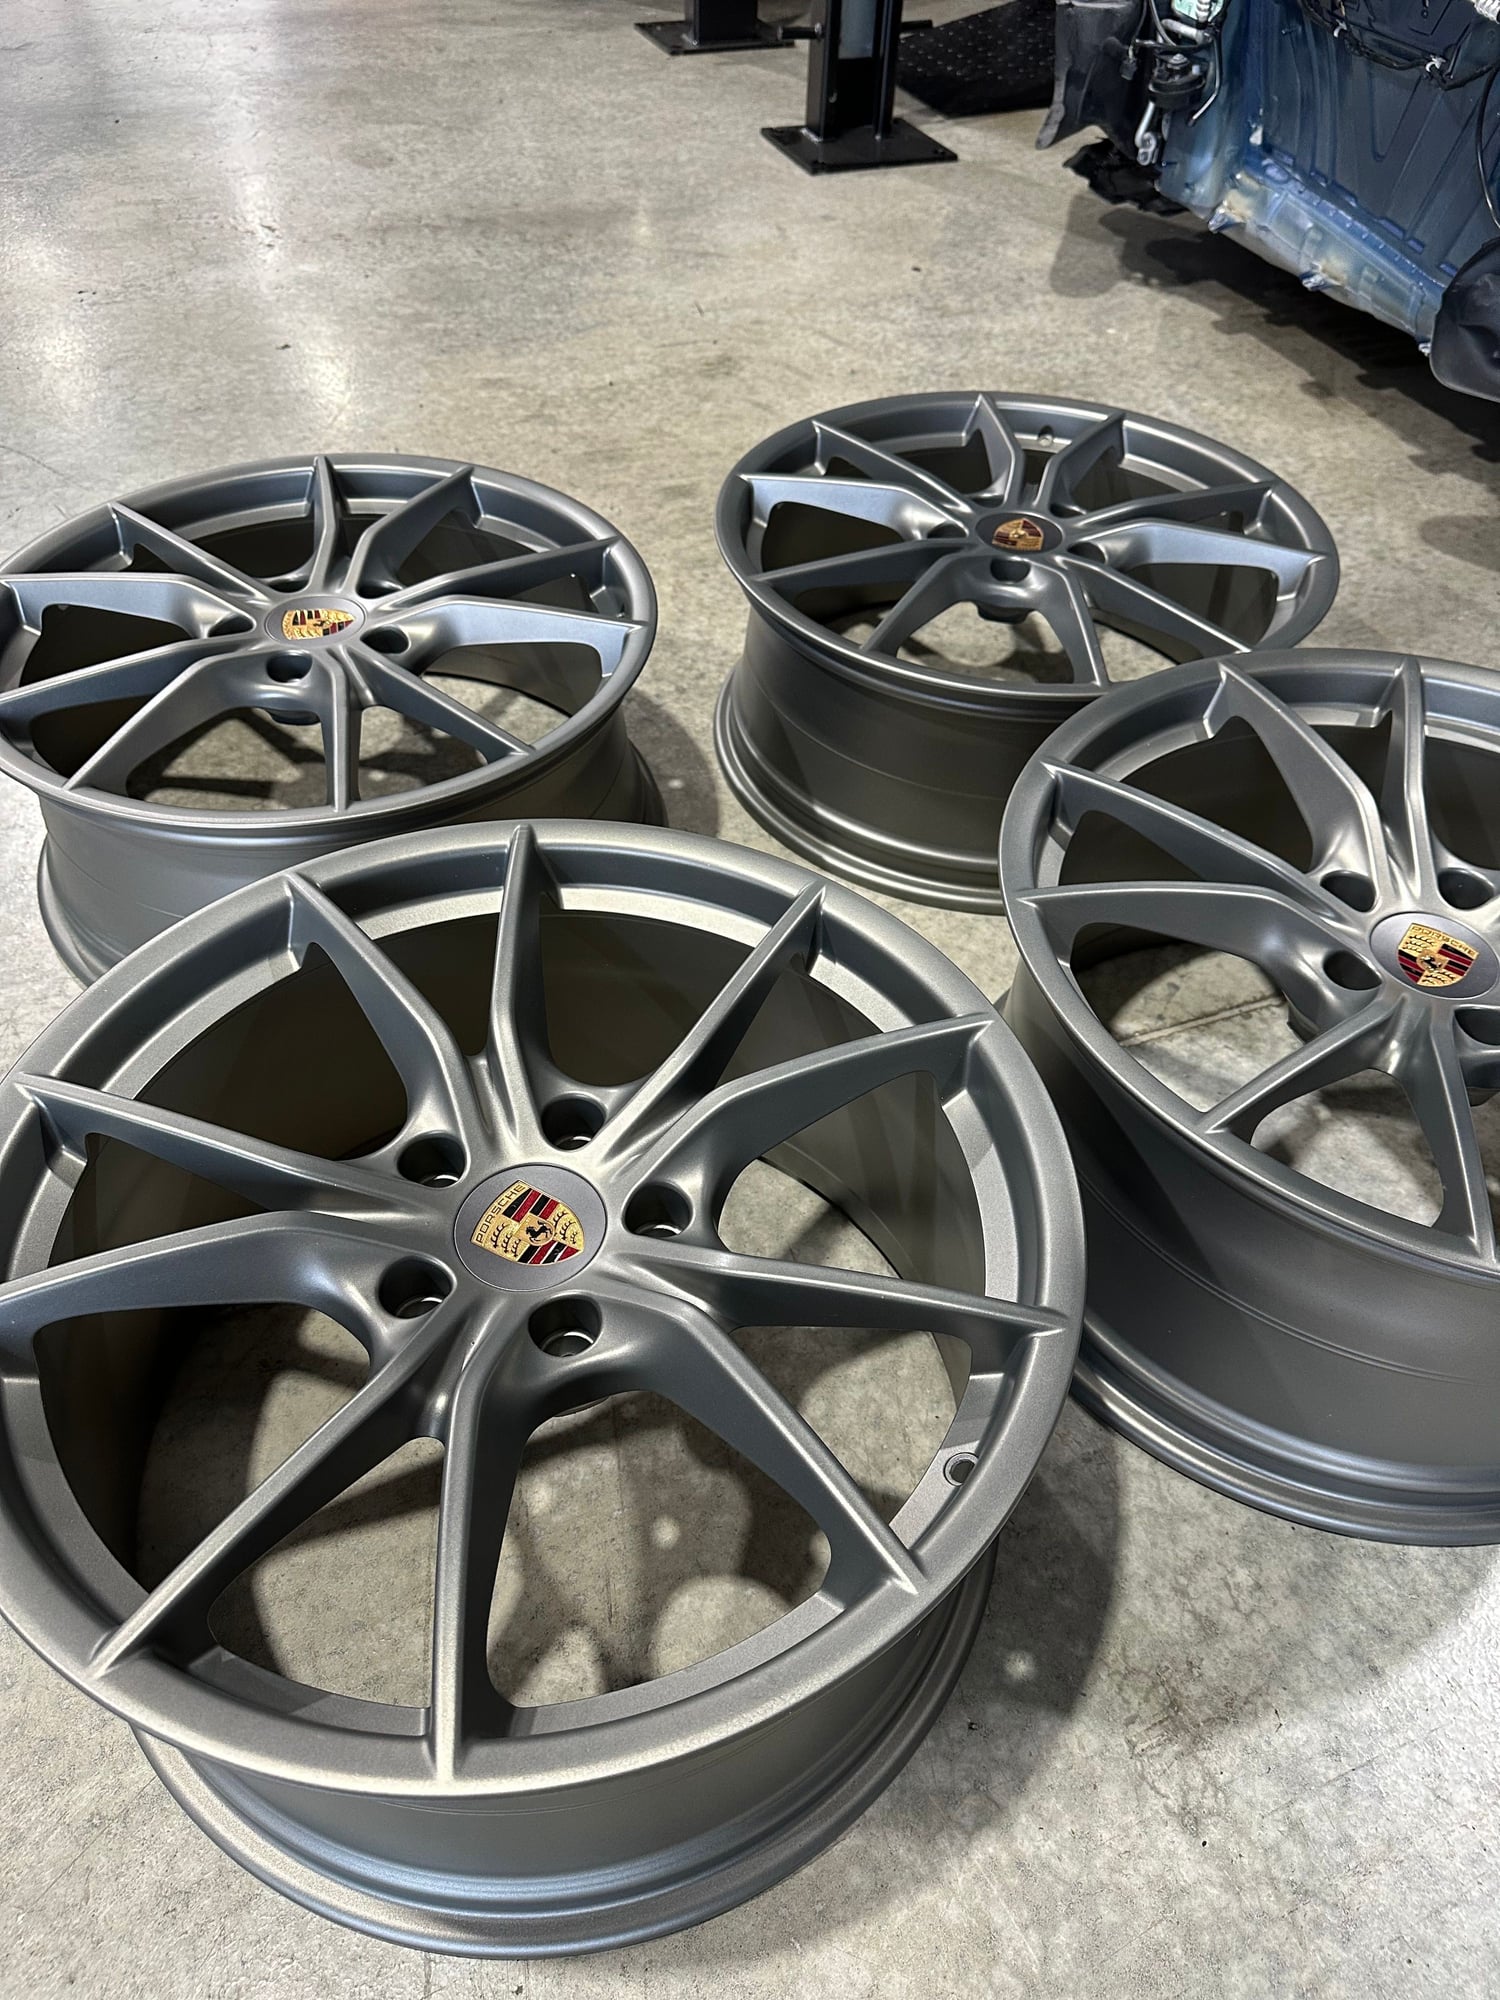 Wheels and Tires/Axles - FS: 20” 718/981 Carrera II platinum satin just refinished like new - Used - All Years  All Models - Saint Joseph, MO 64504, United States